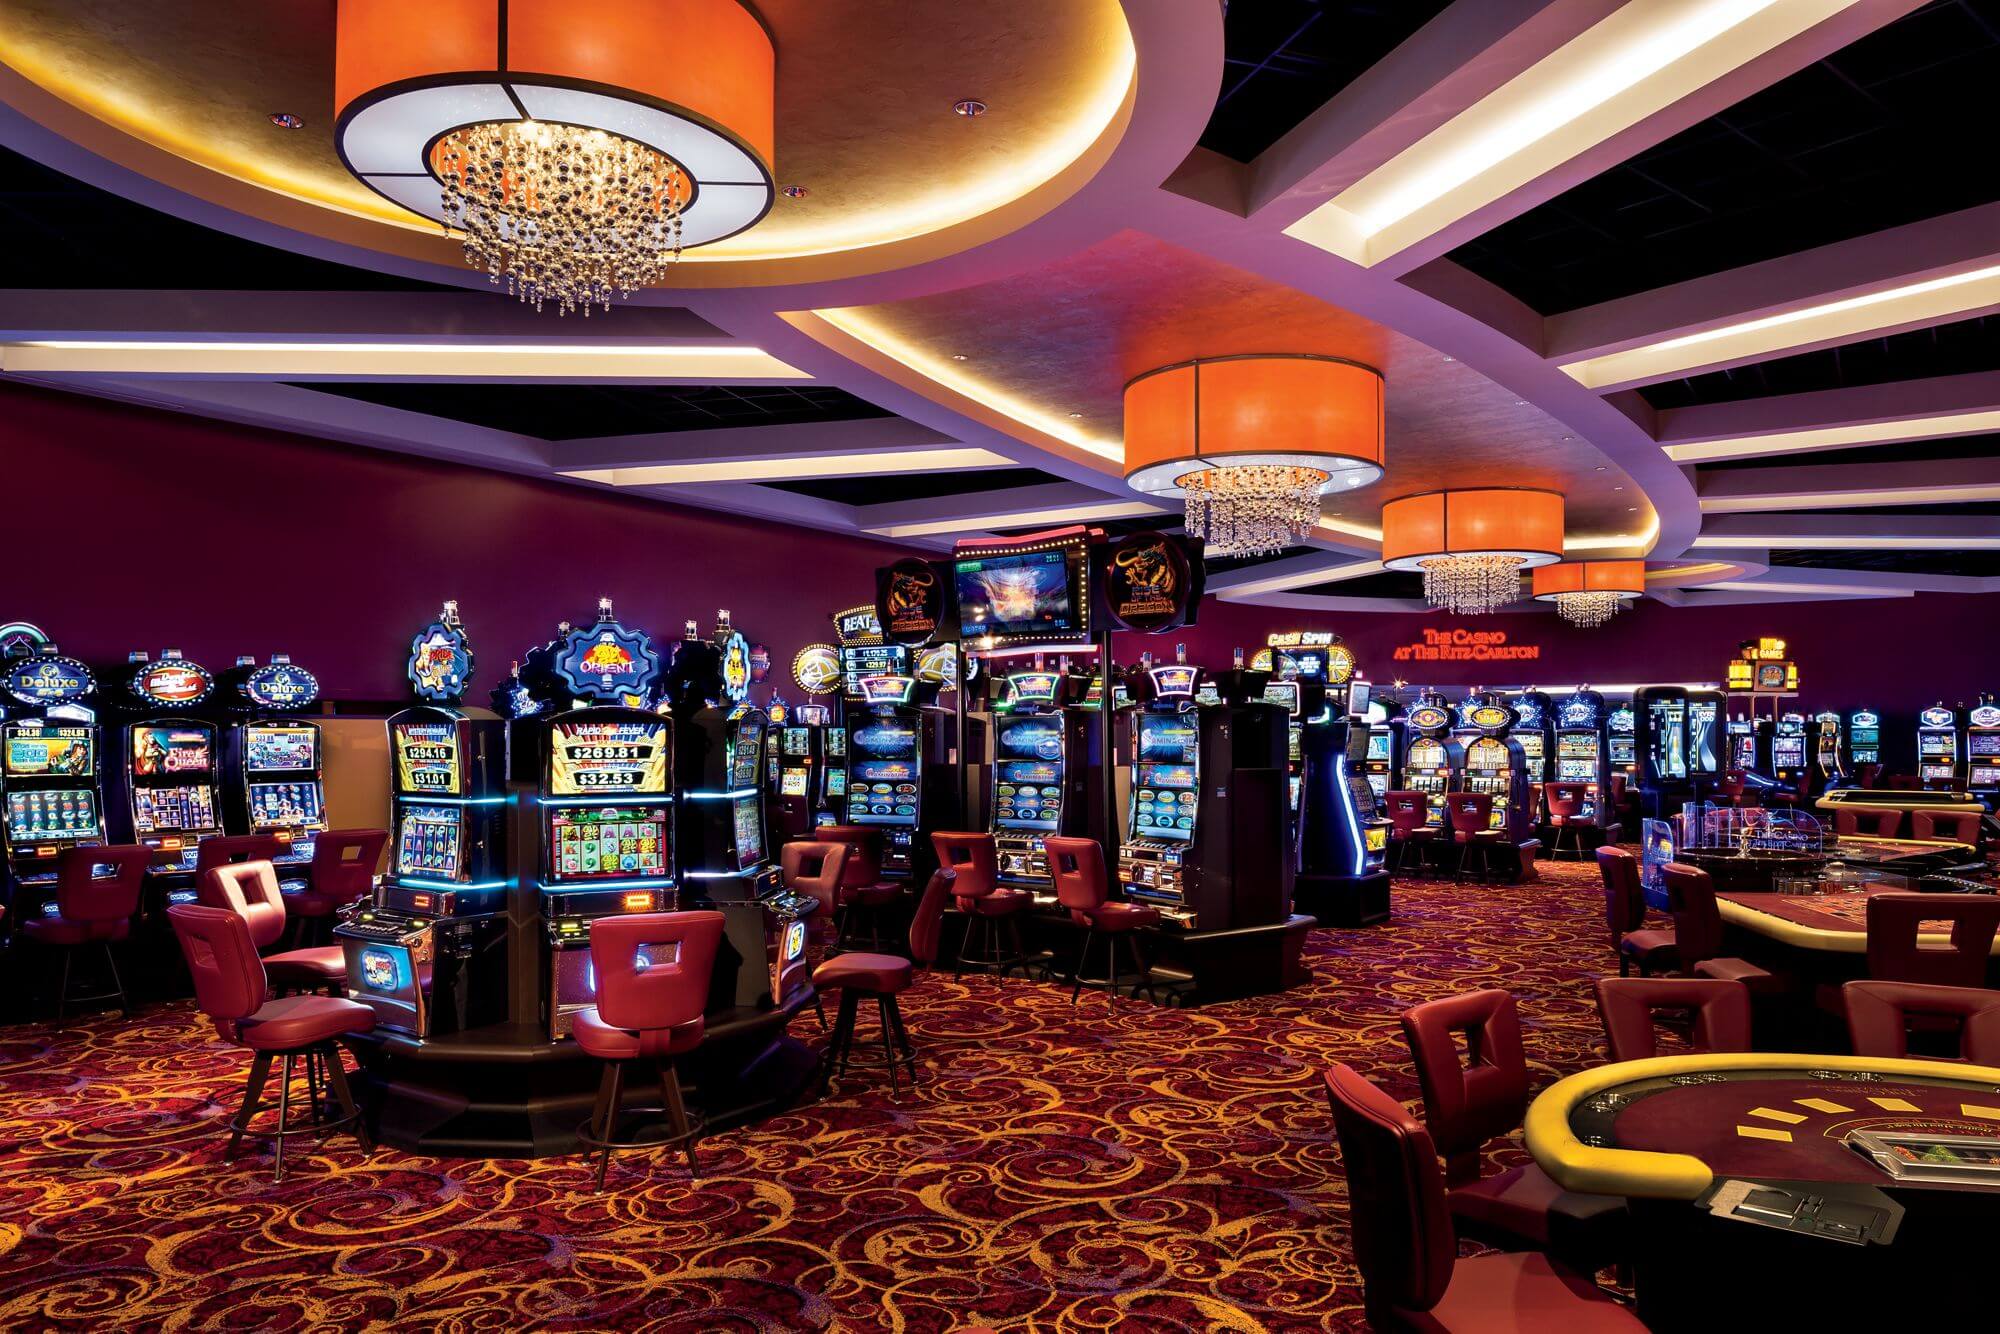 Are Casinos to Blame for the Cardinals’ Covid-19 Cases?